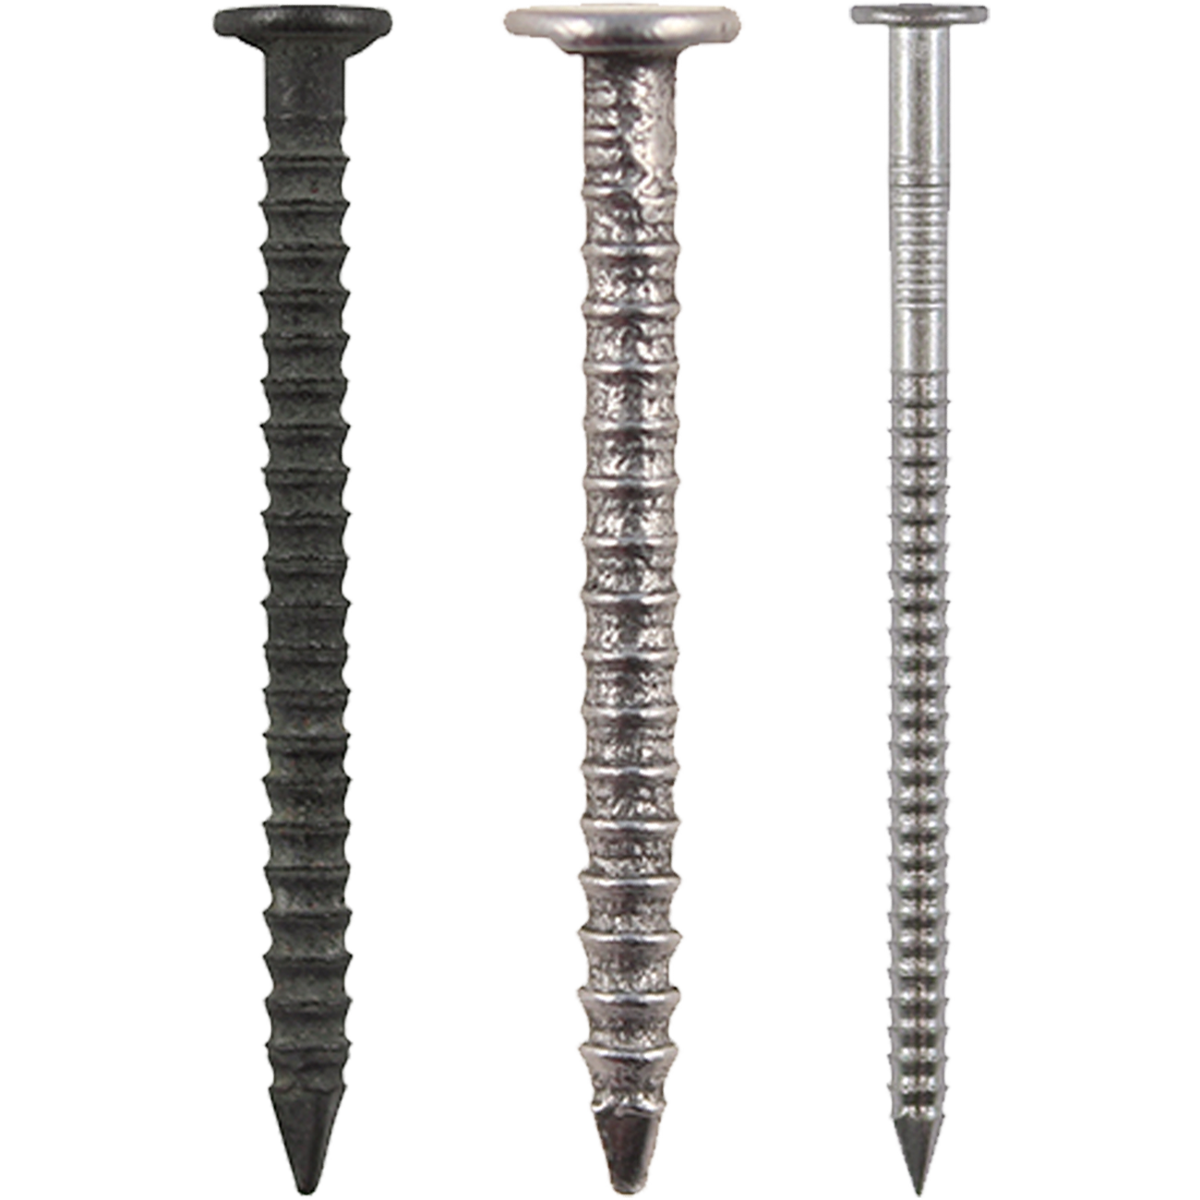 Annular ring shank nails are available in a bright steel, A2 stainless steel and sheradised steel variety of sizes and 